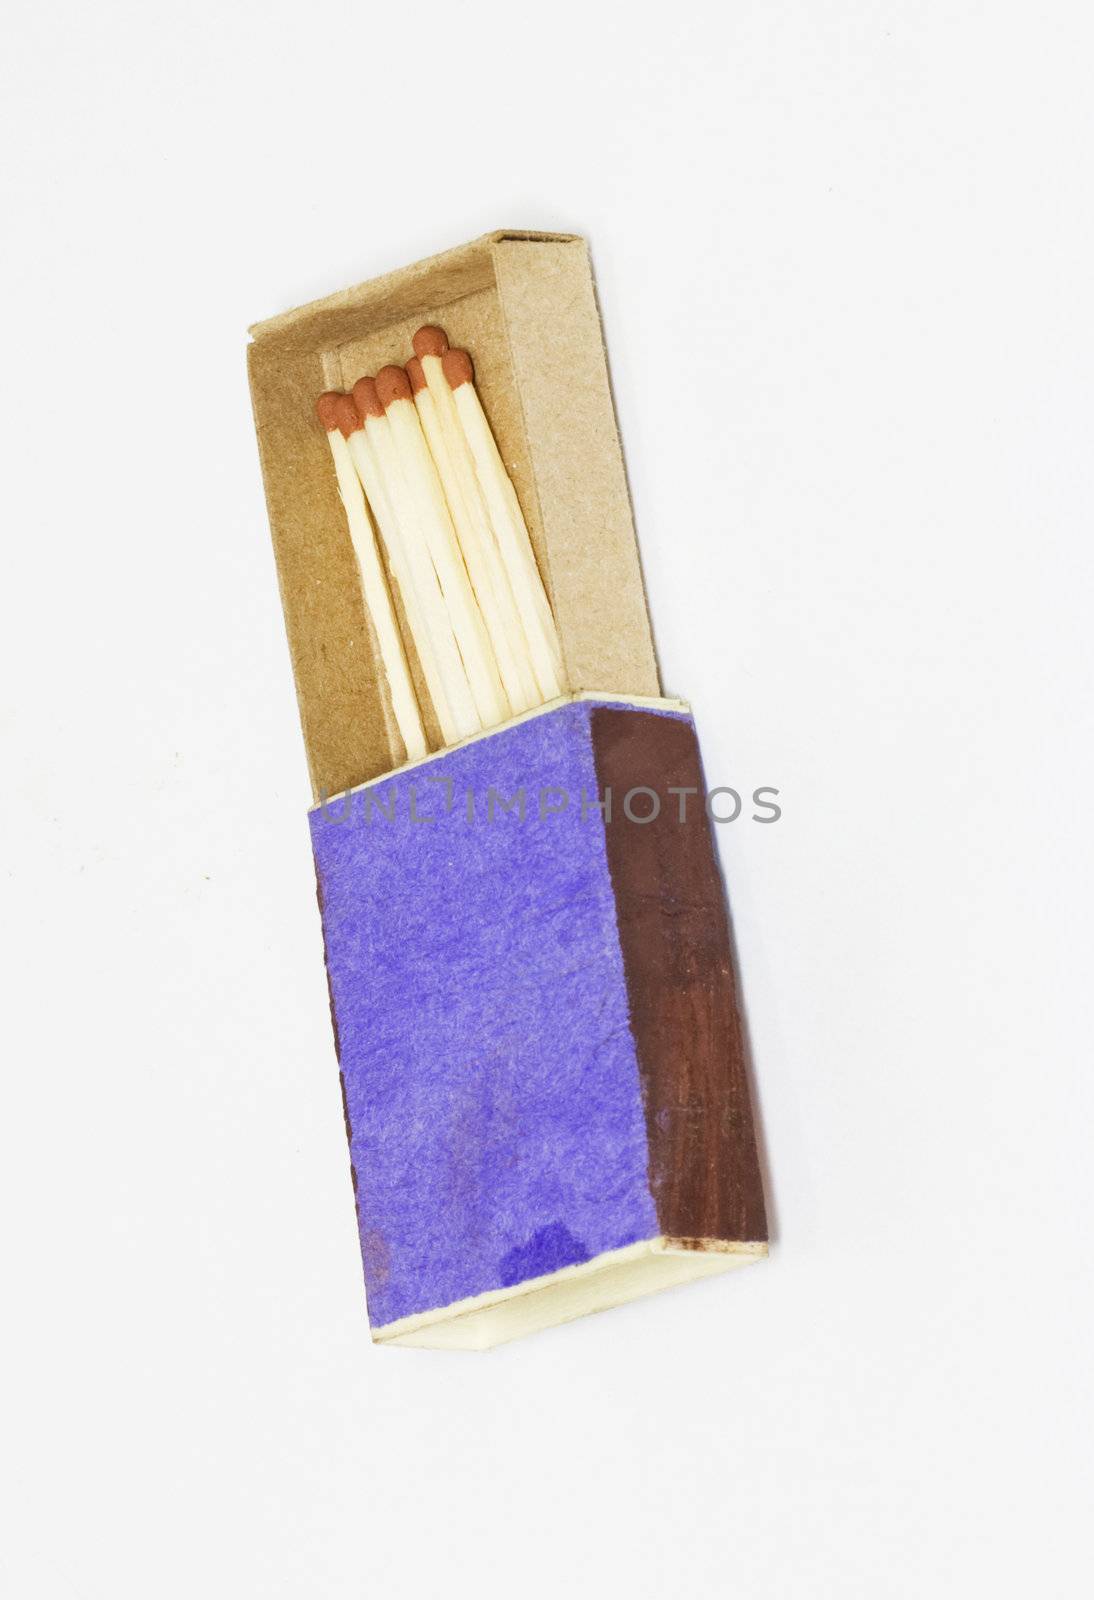 The match box and matches isolated on white background 